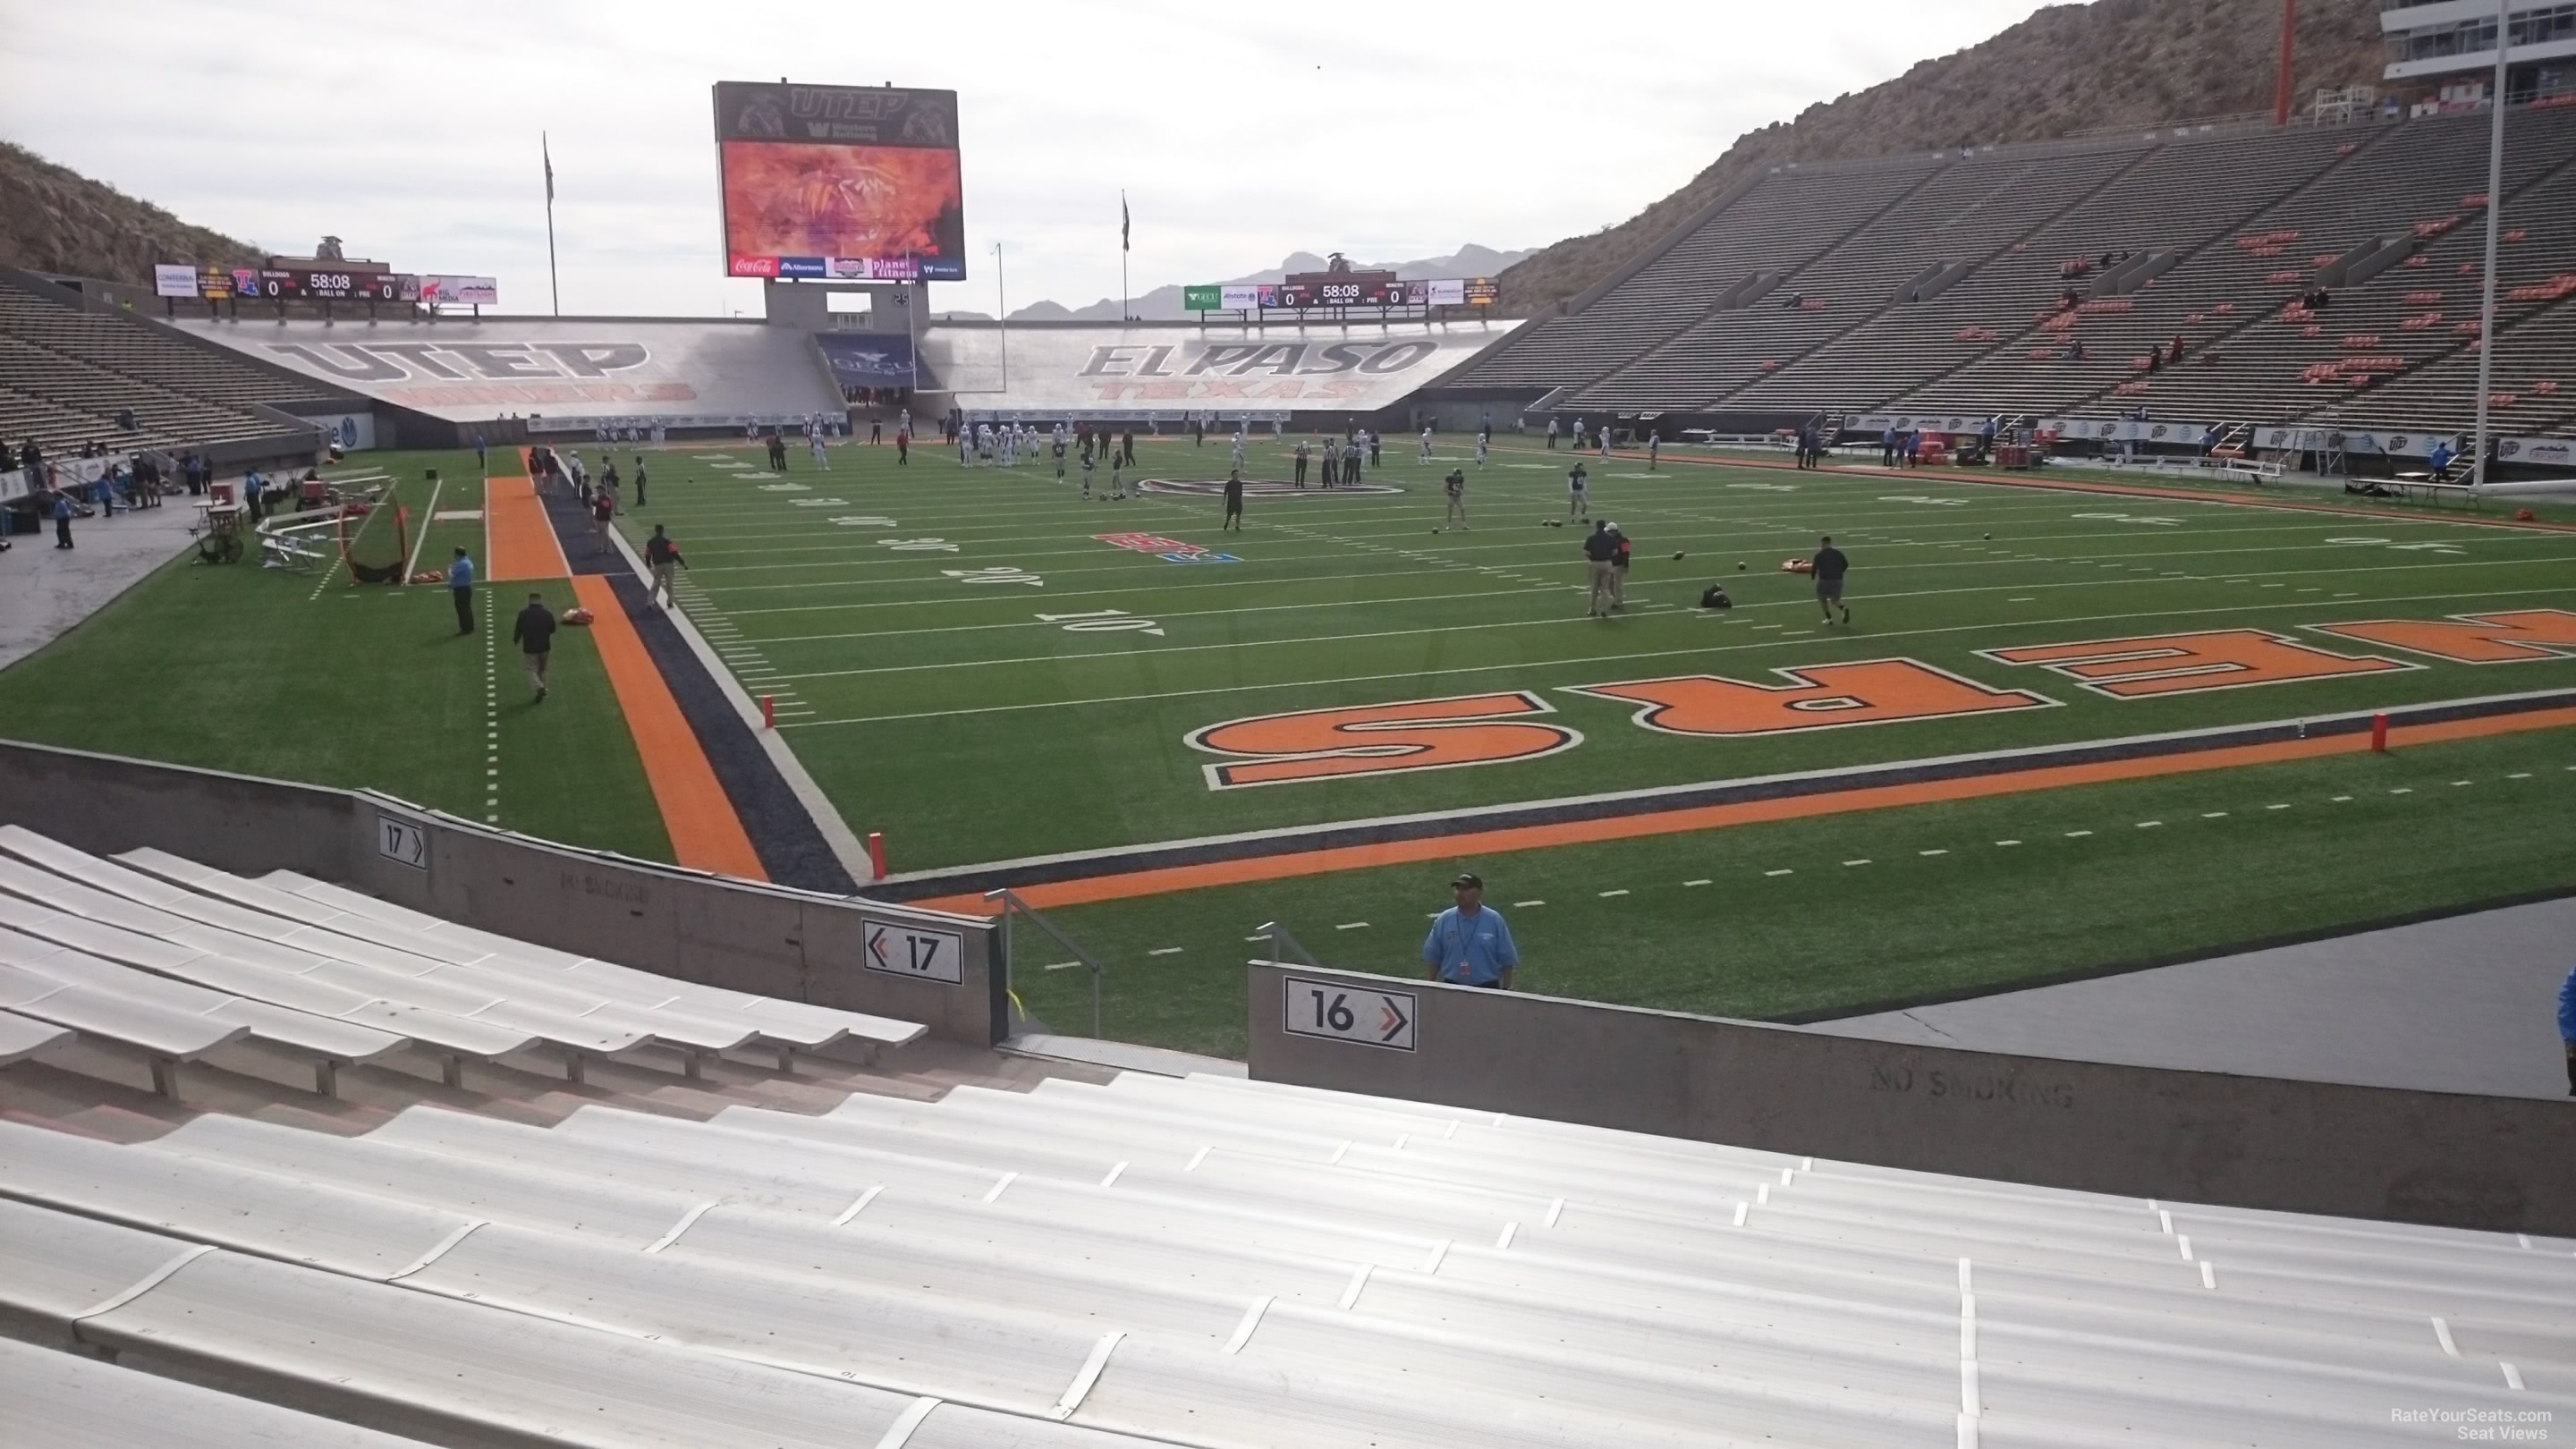 section 16, row 15 seat view  for football - sun bowl